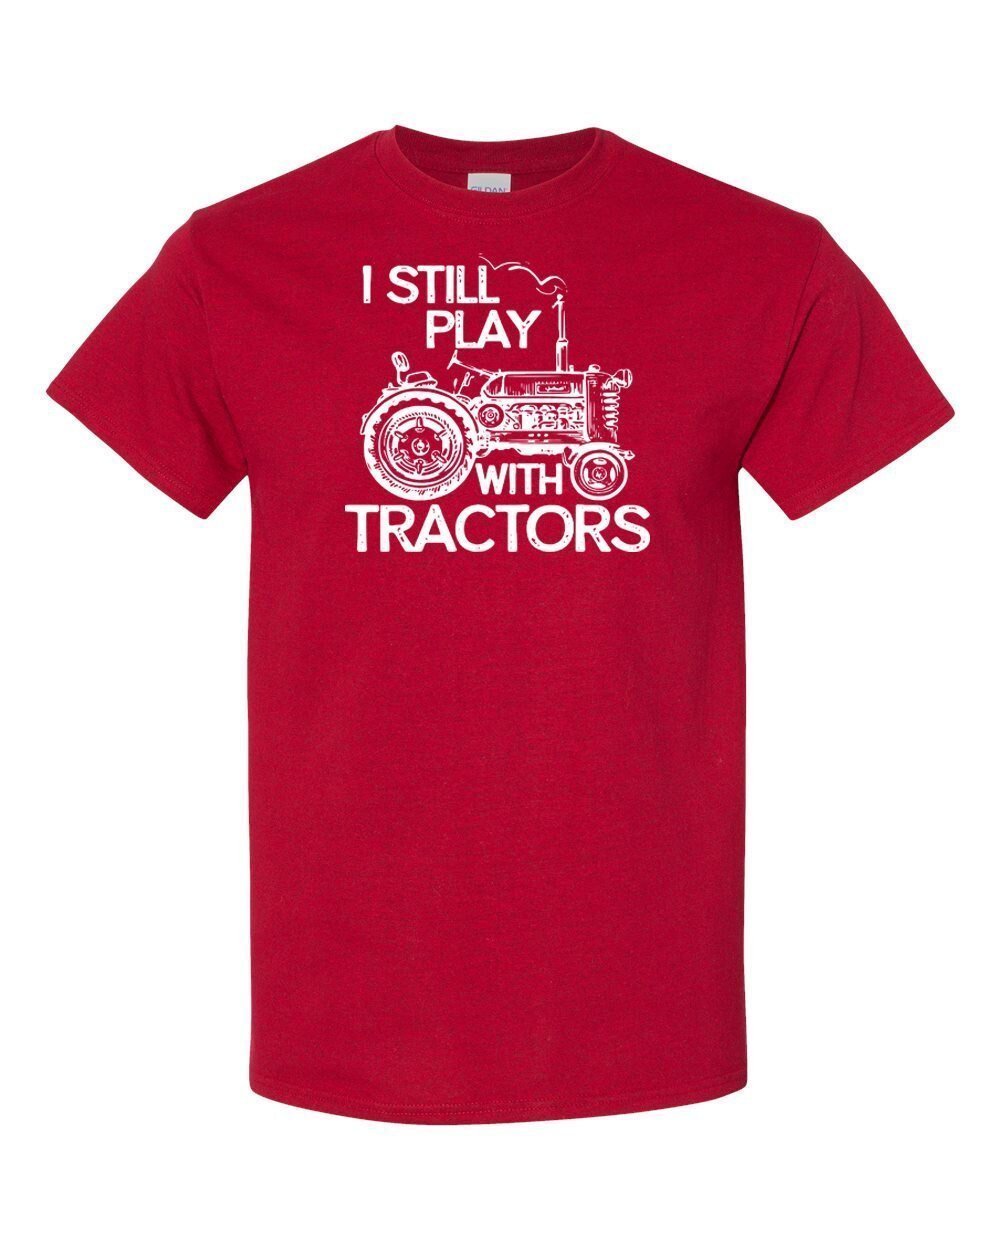 I Still Play with Tractors Download | Cryin Creek